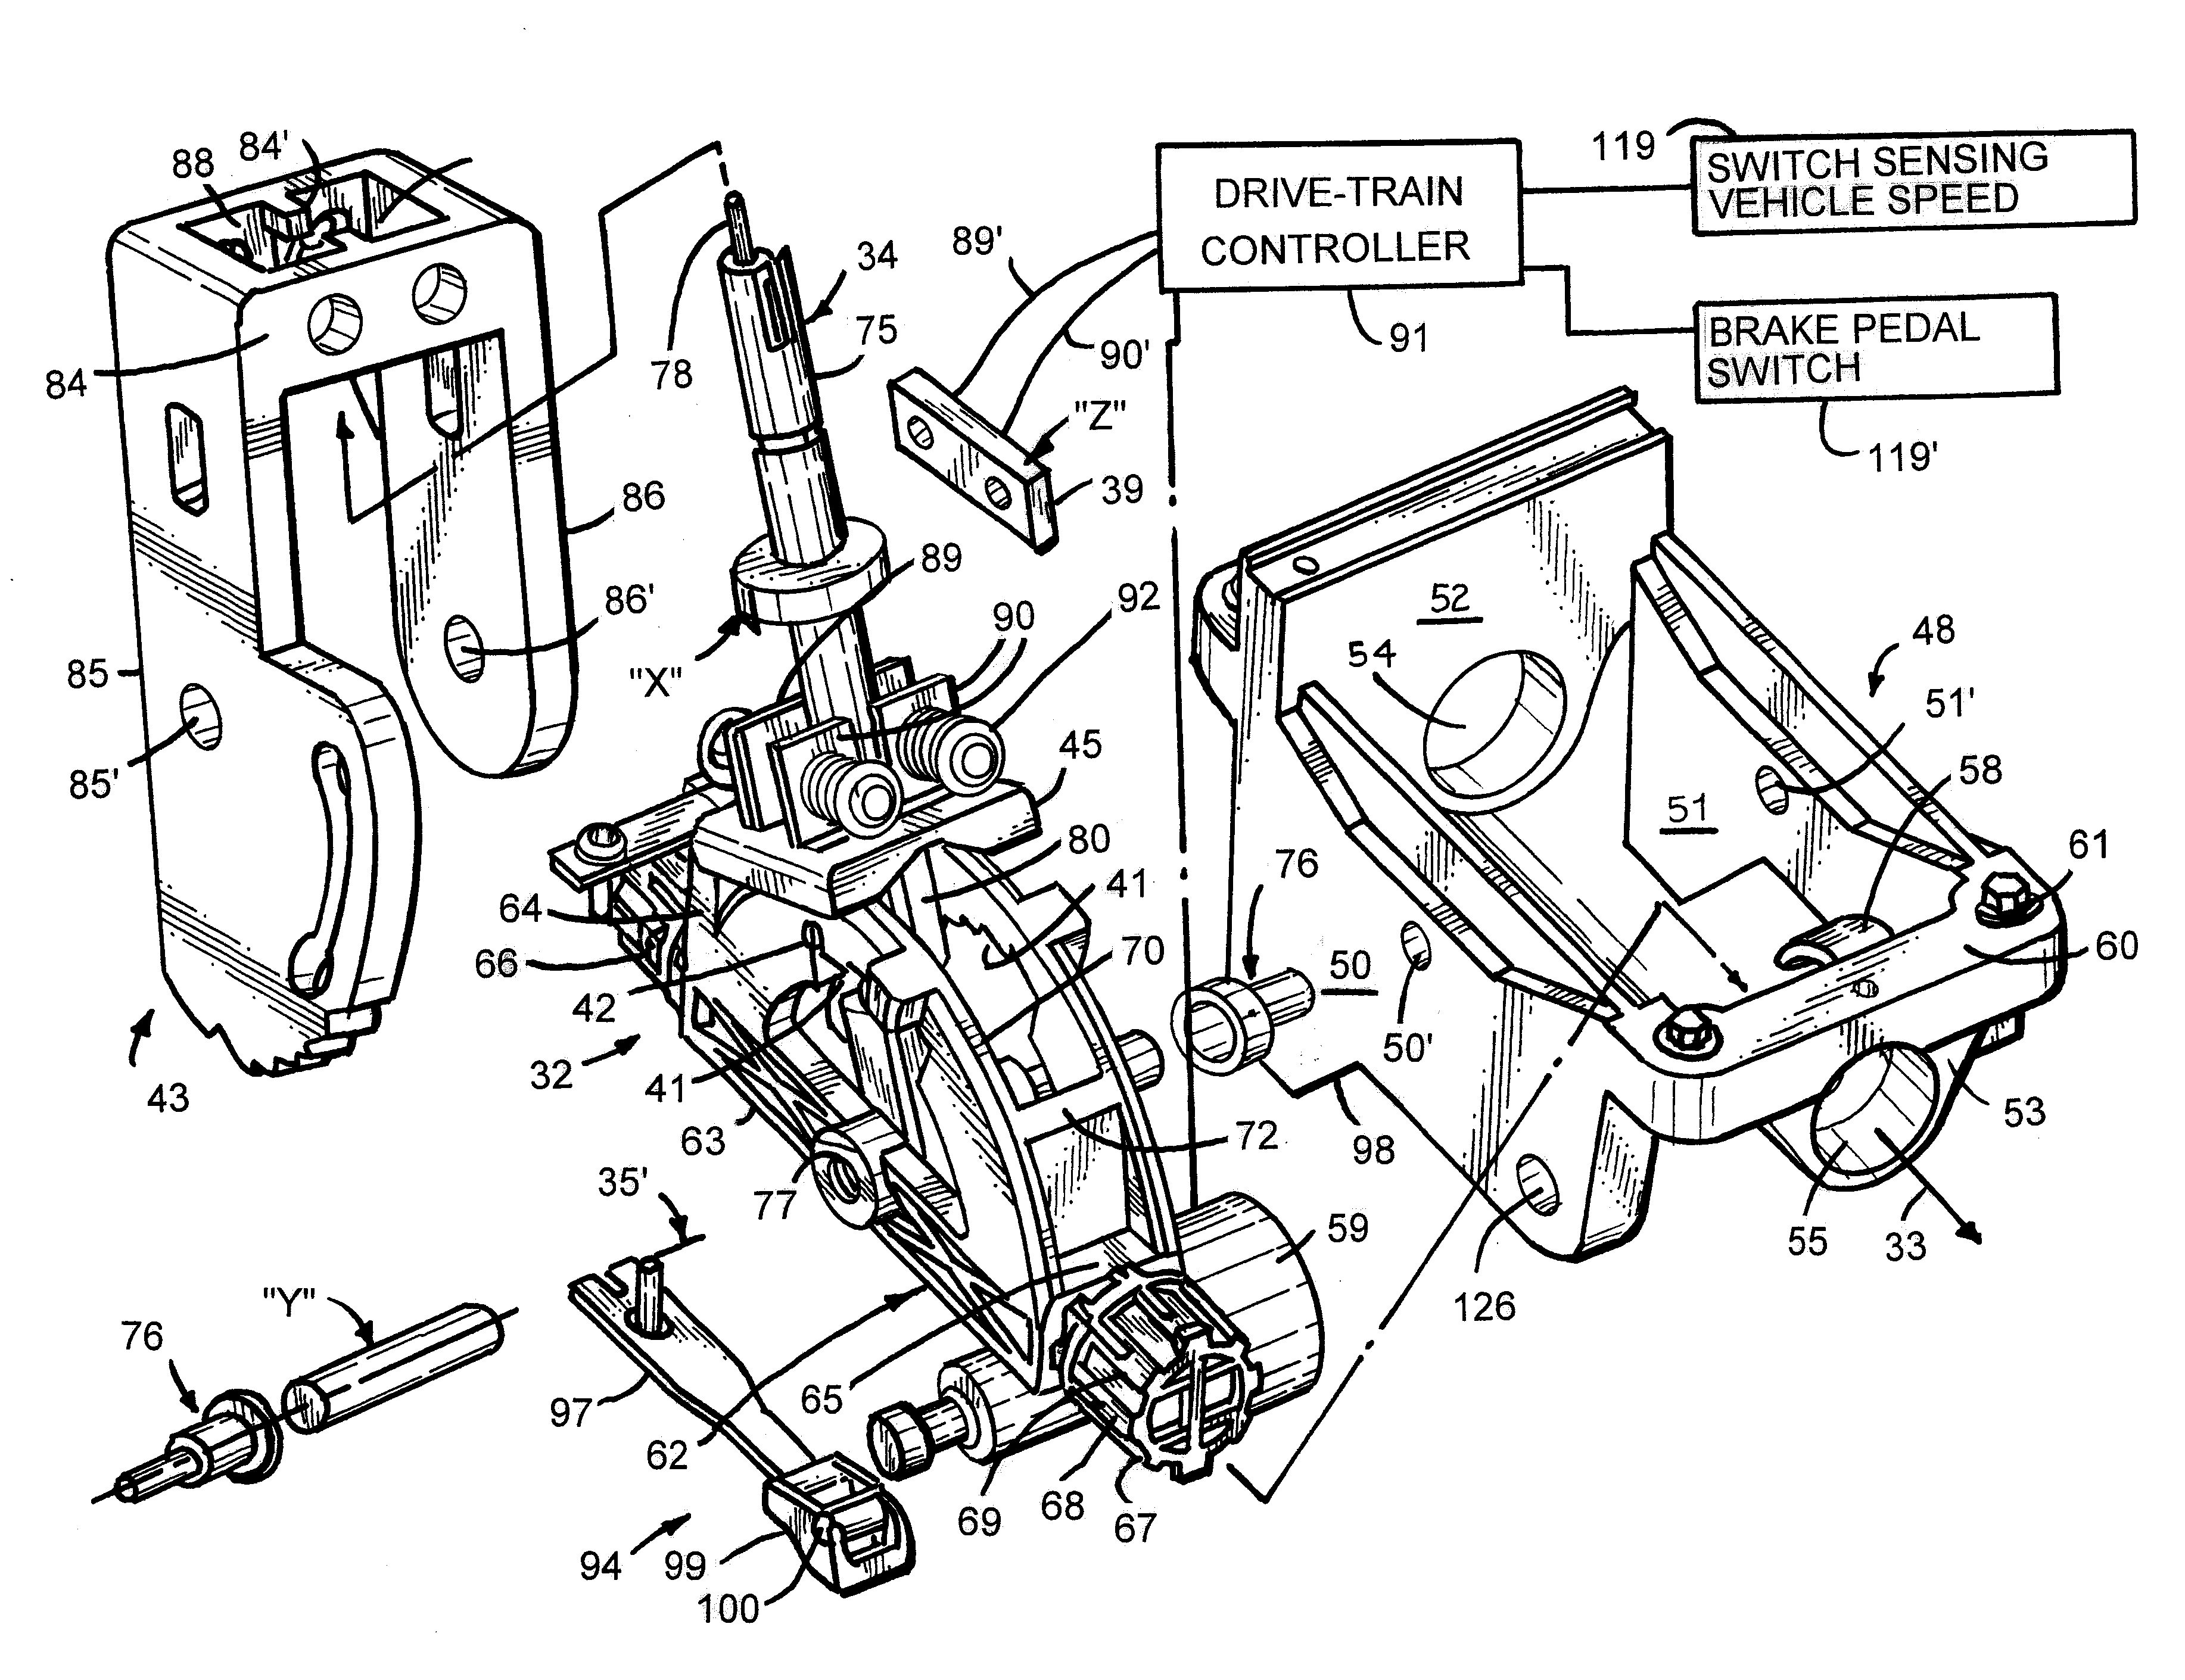 Shifter with park lock and neutral lock device